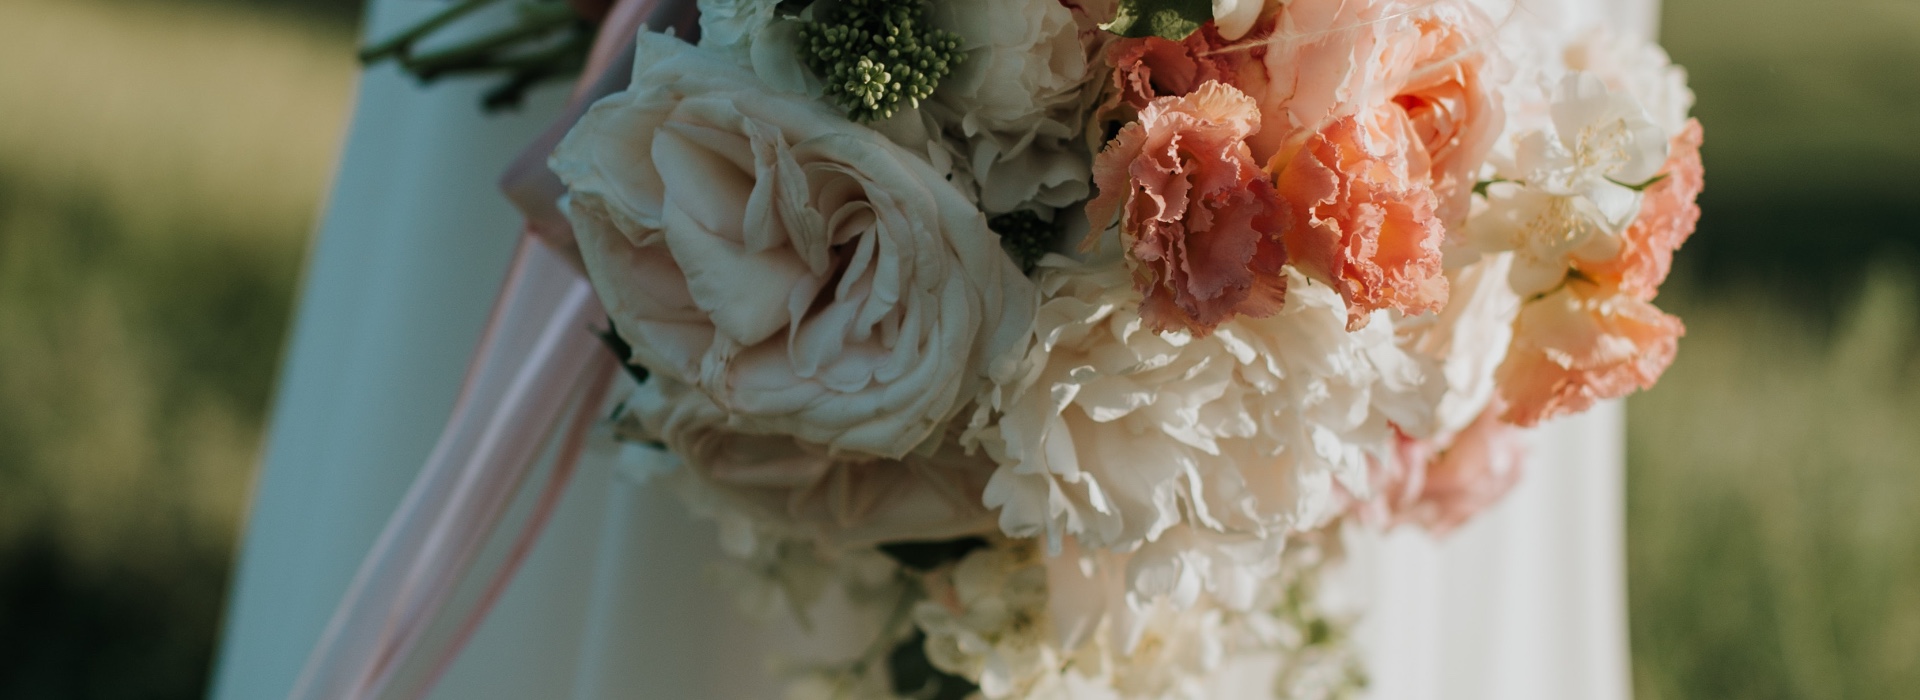 10 Trending Wedding Floral Designs - Wed Society PRO